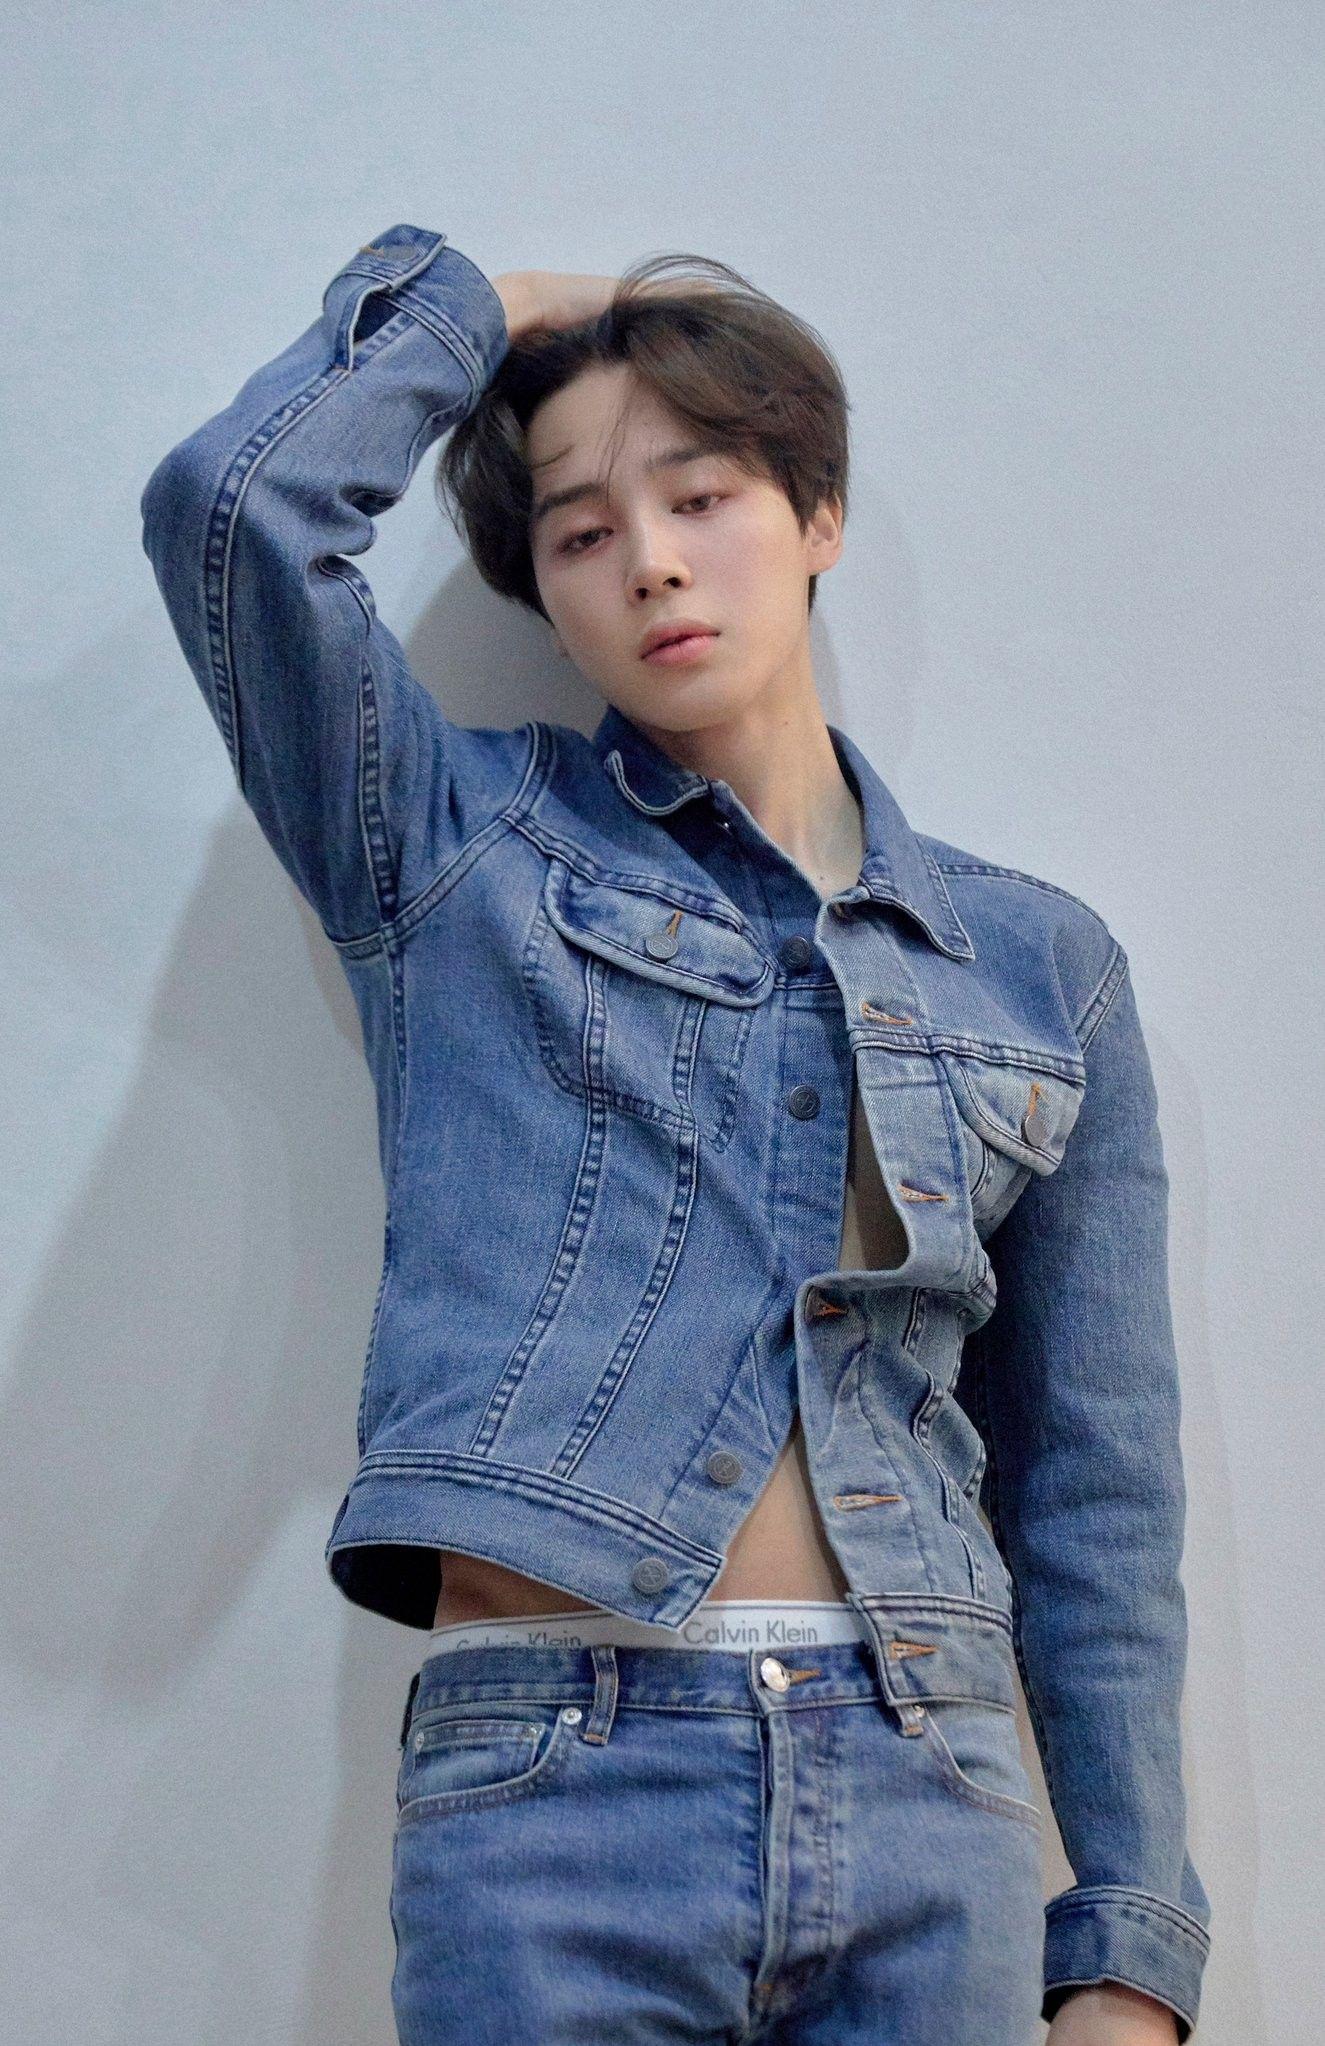 Free download BigHit Entertainment on wallpapers BTS Jimin Bts